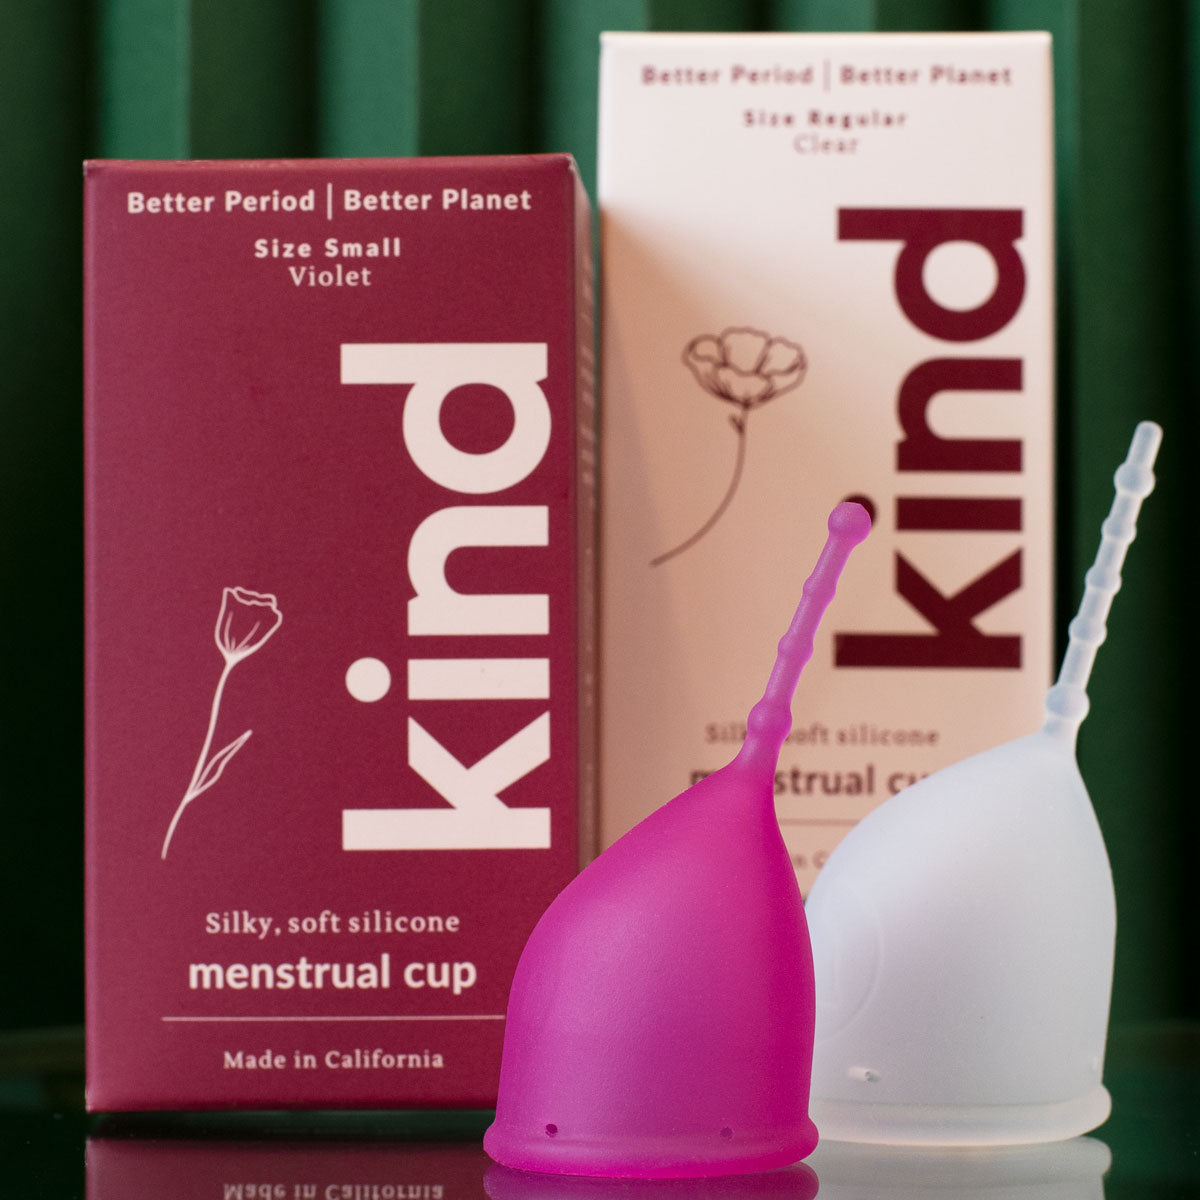 KIND cup new design both colors size small and size regular with packaging